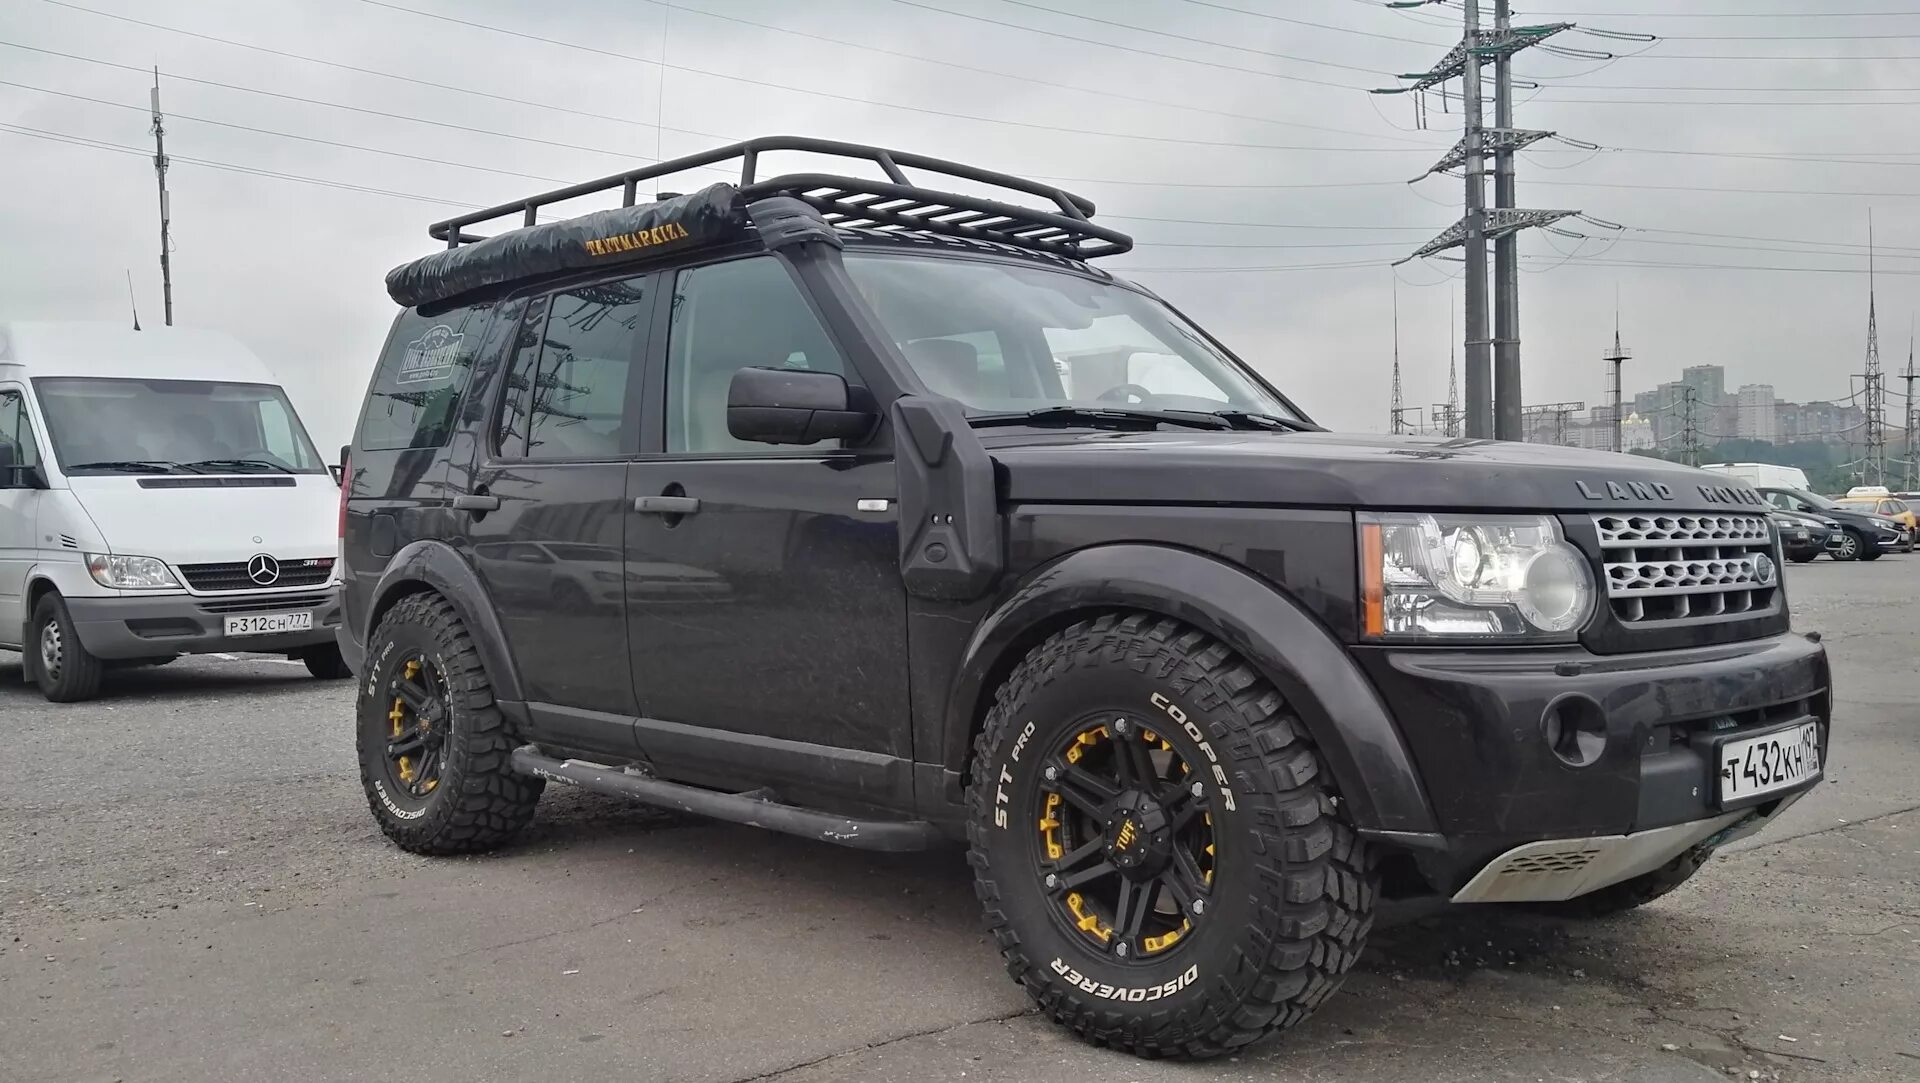 Land Rover Discovery 3 Offroad. Land Rover Discovery 4 off Road Tuning. Ленд Ровер Дискавери 4 офф роуд. Land Rover Discovery 2 35 колеса. Тюнинг дискавери 3